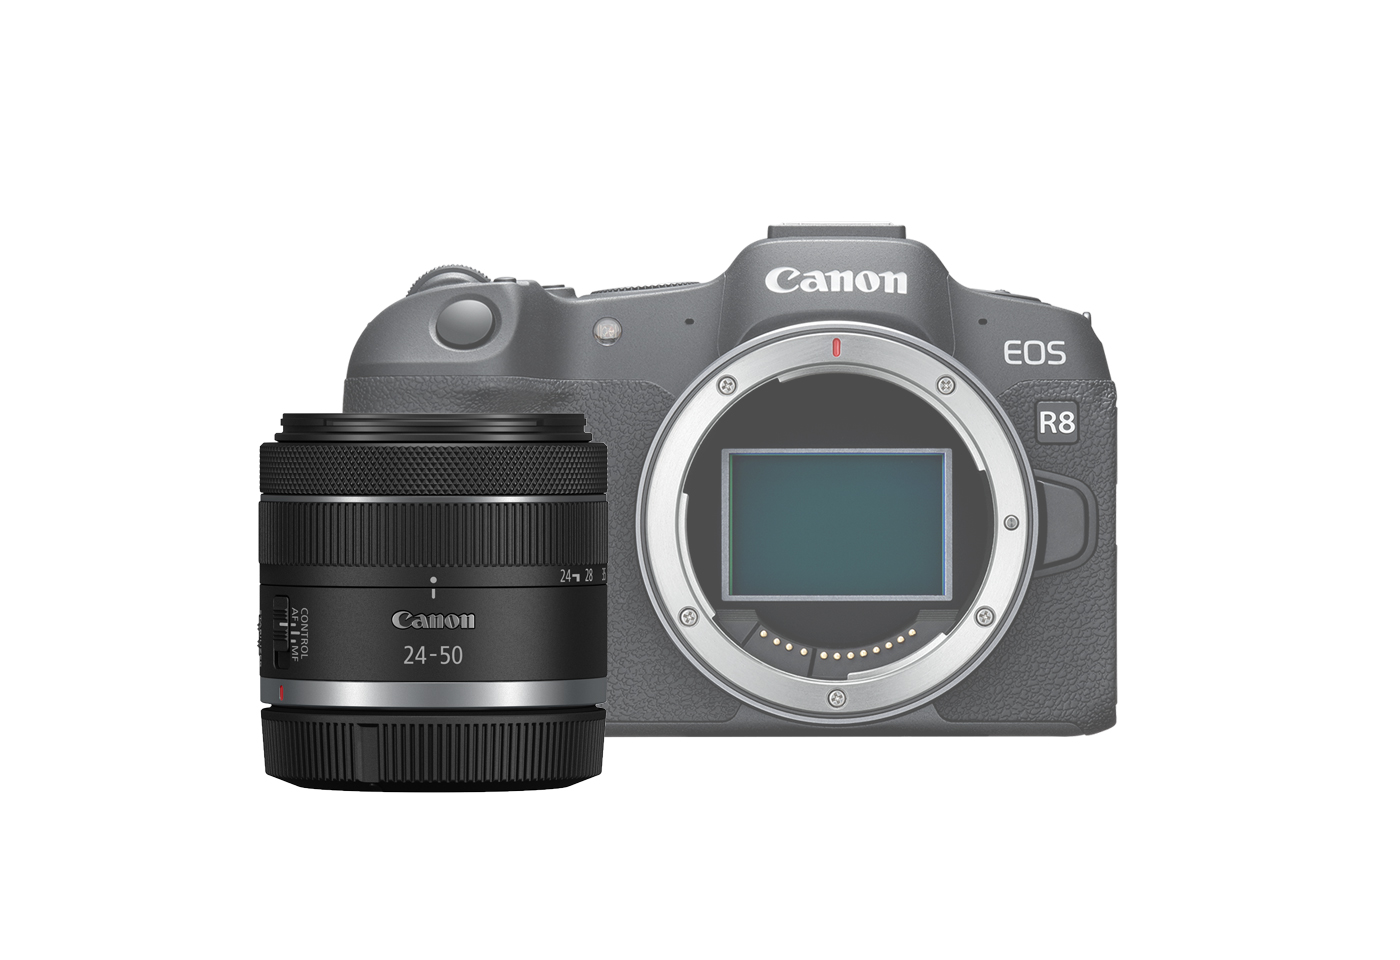 EOS R8 mirrorless camera with RF 24-50mm f/4.5-6.3 IS STM